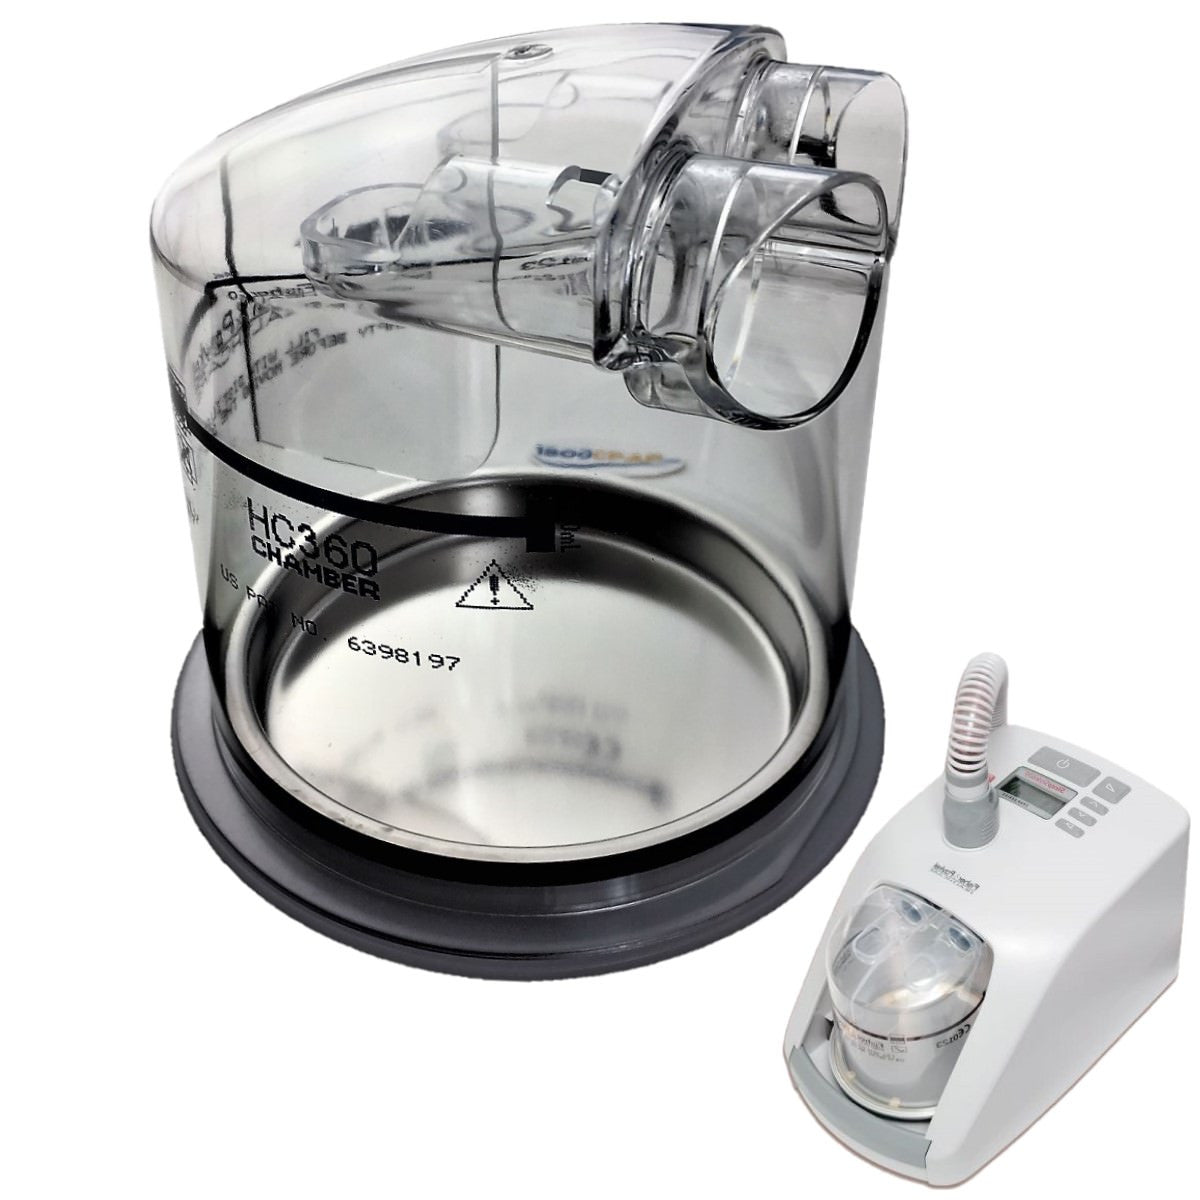 SleepStyle 600 CPAP/Auto Series Dishwasher Safe Chamber by Fisher & Paykel